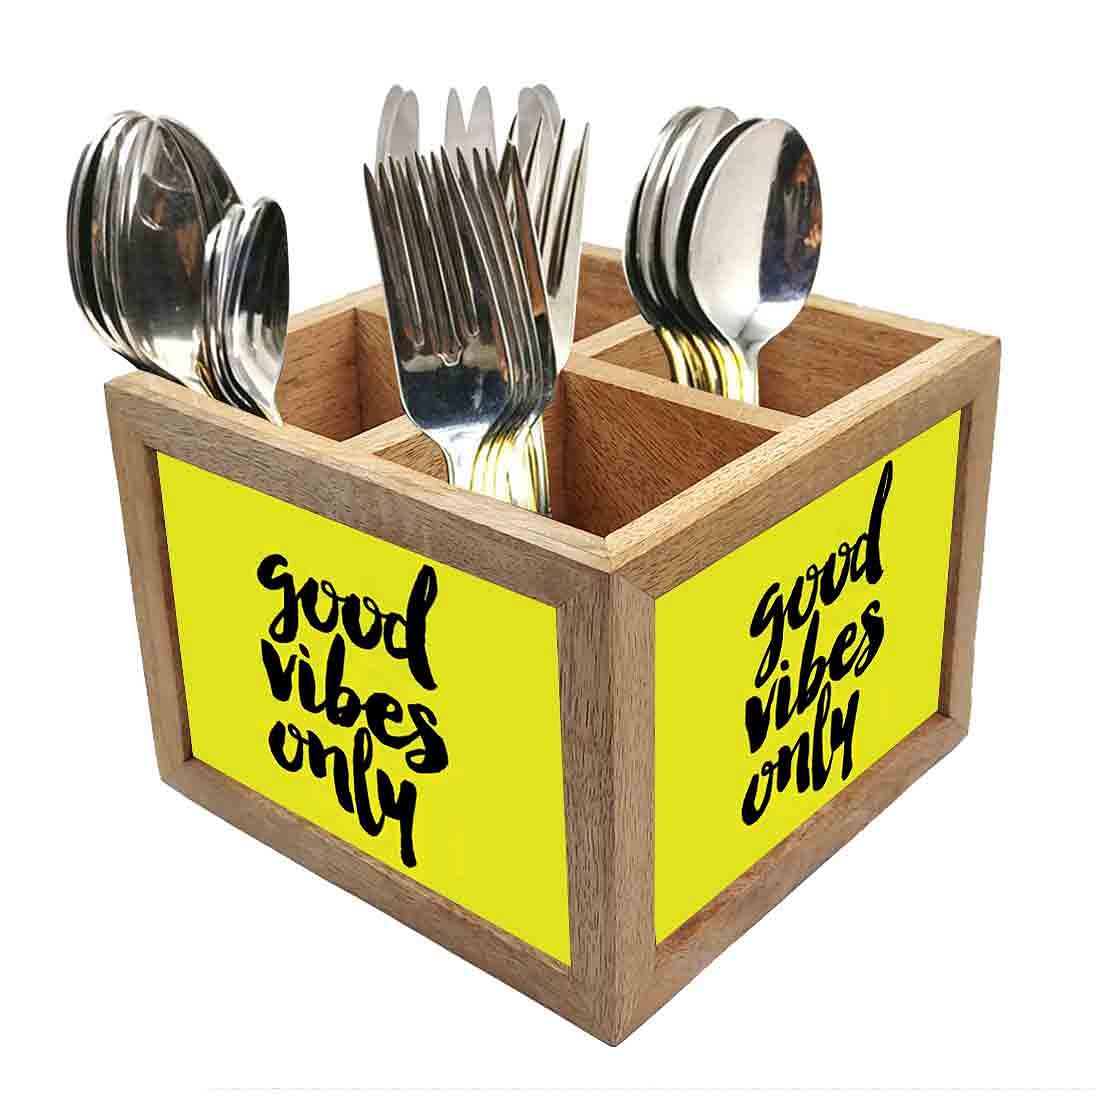 Amazing Wooden Cutlery Holder for Kitchen Organizer - Good Vibes Nutcase